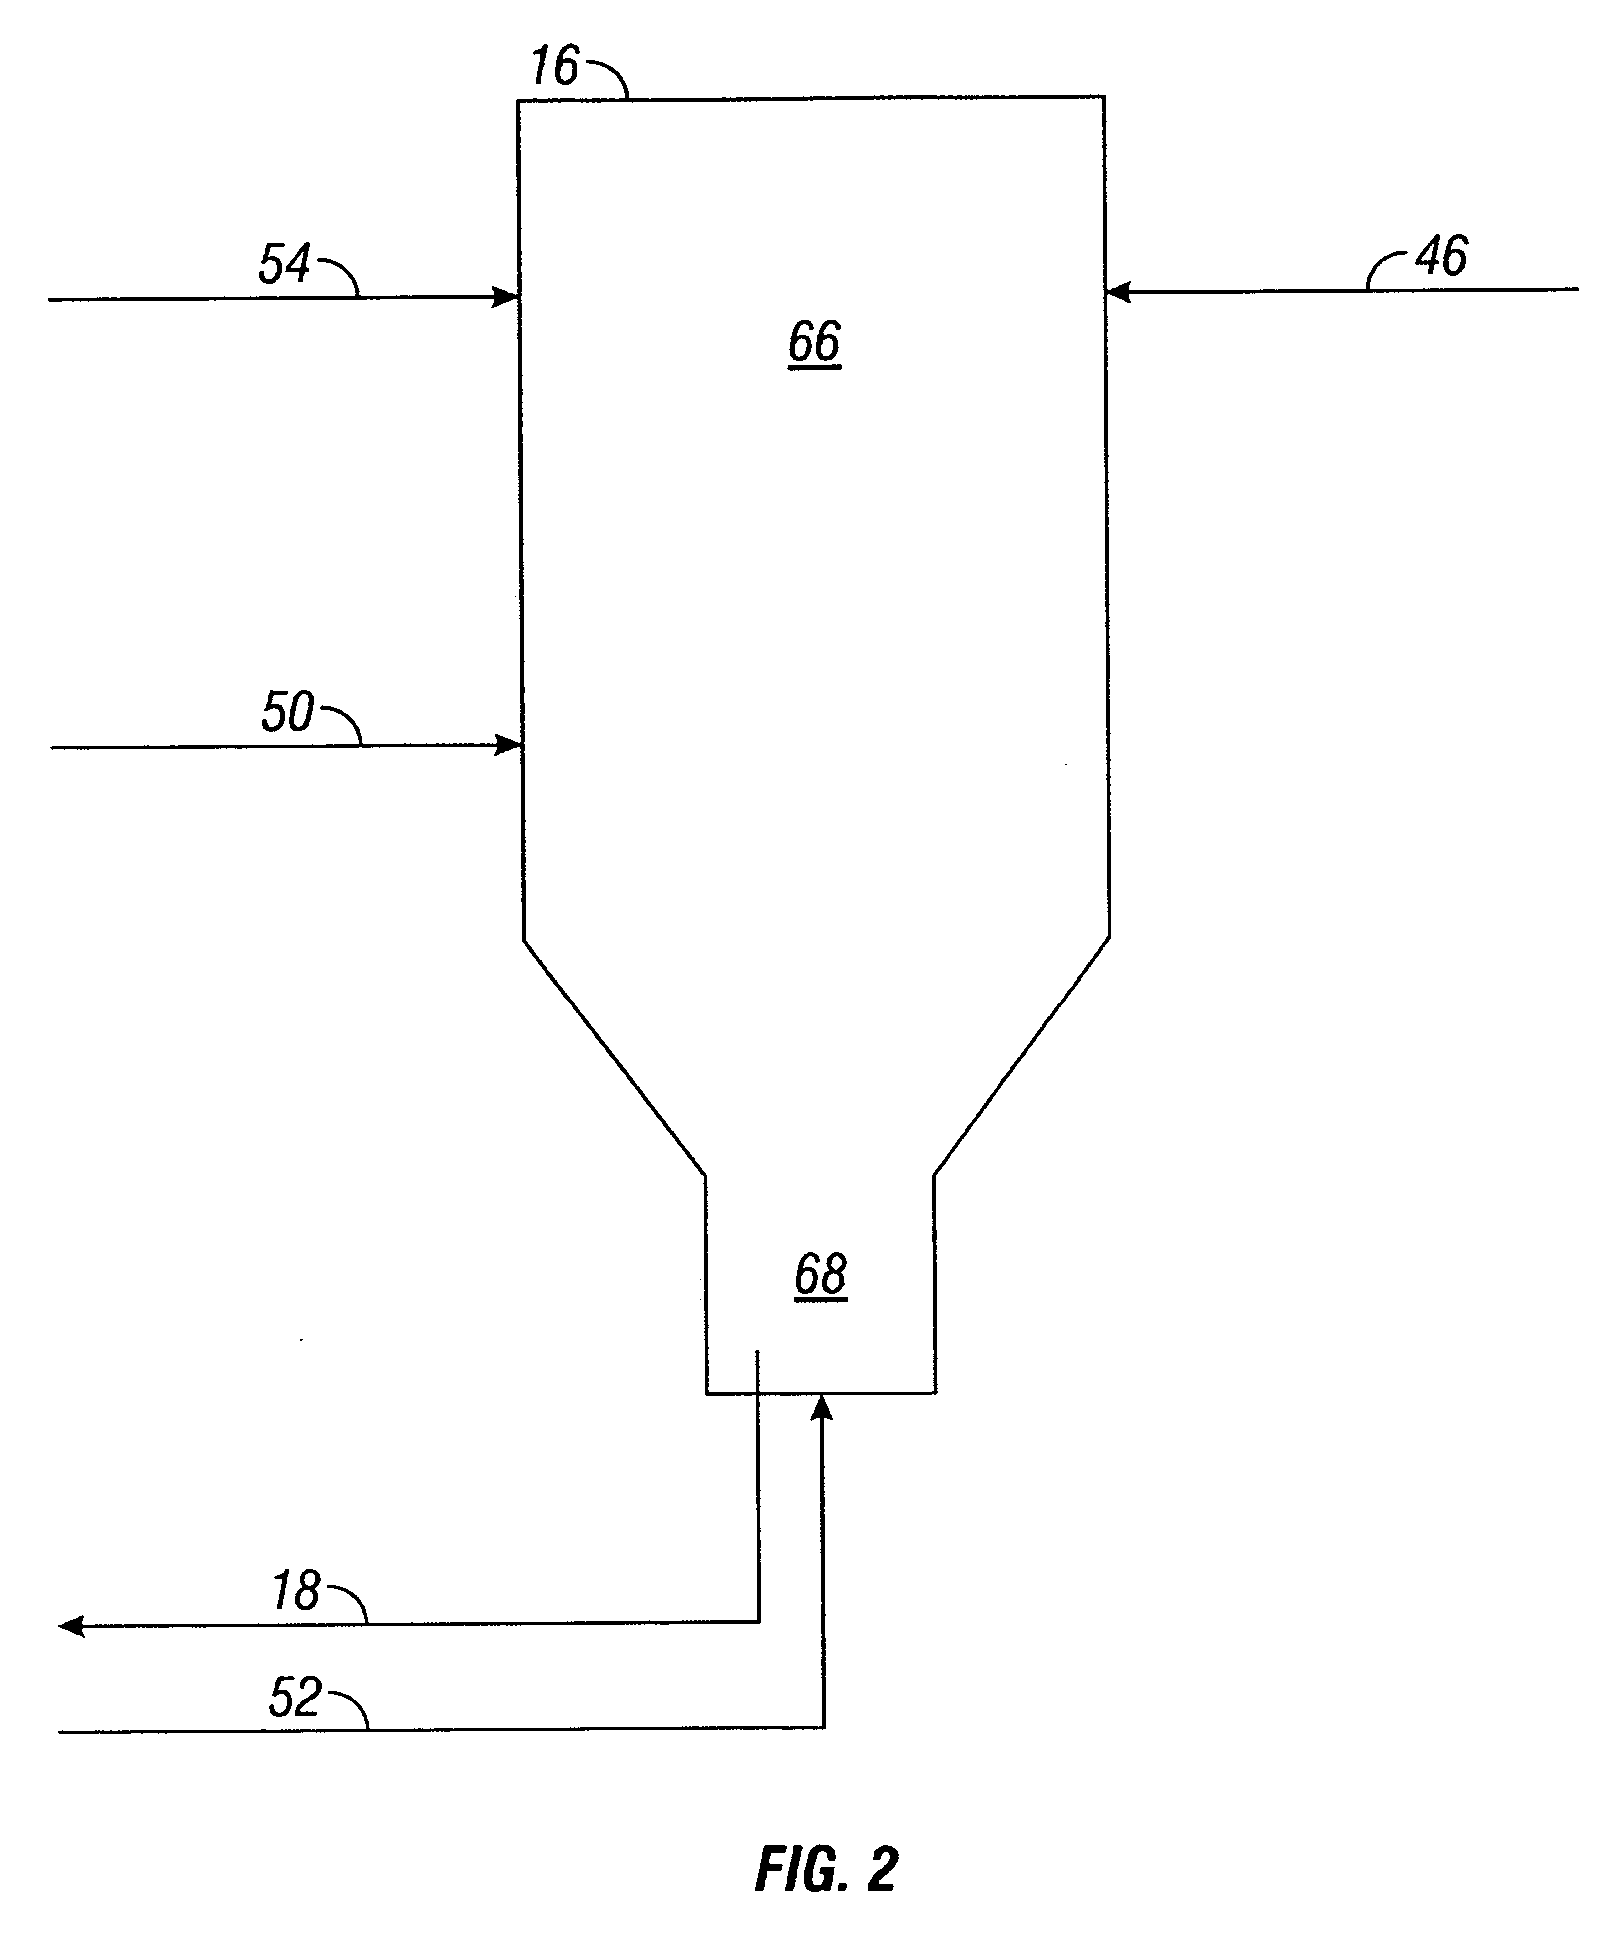 Method and apparatus for making a middle distillate product and lower olefins from a hydrocarbon feedstock